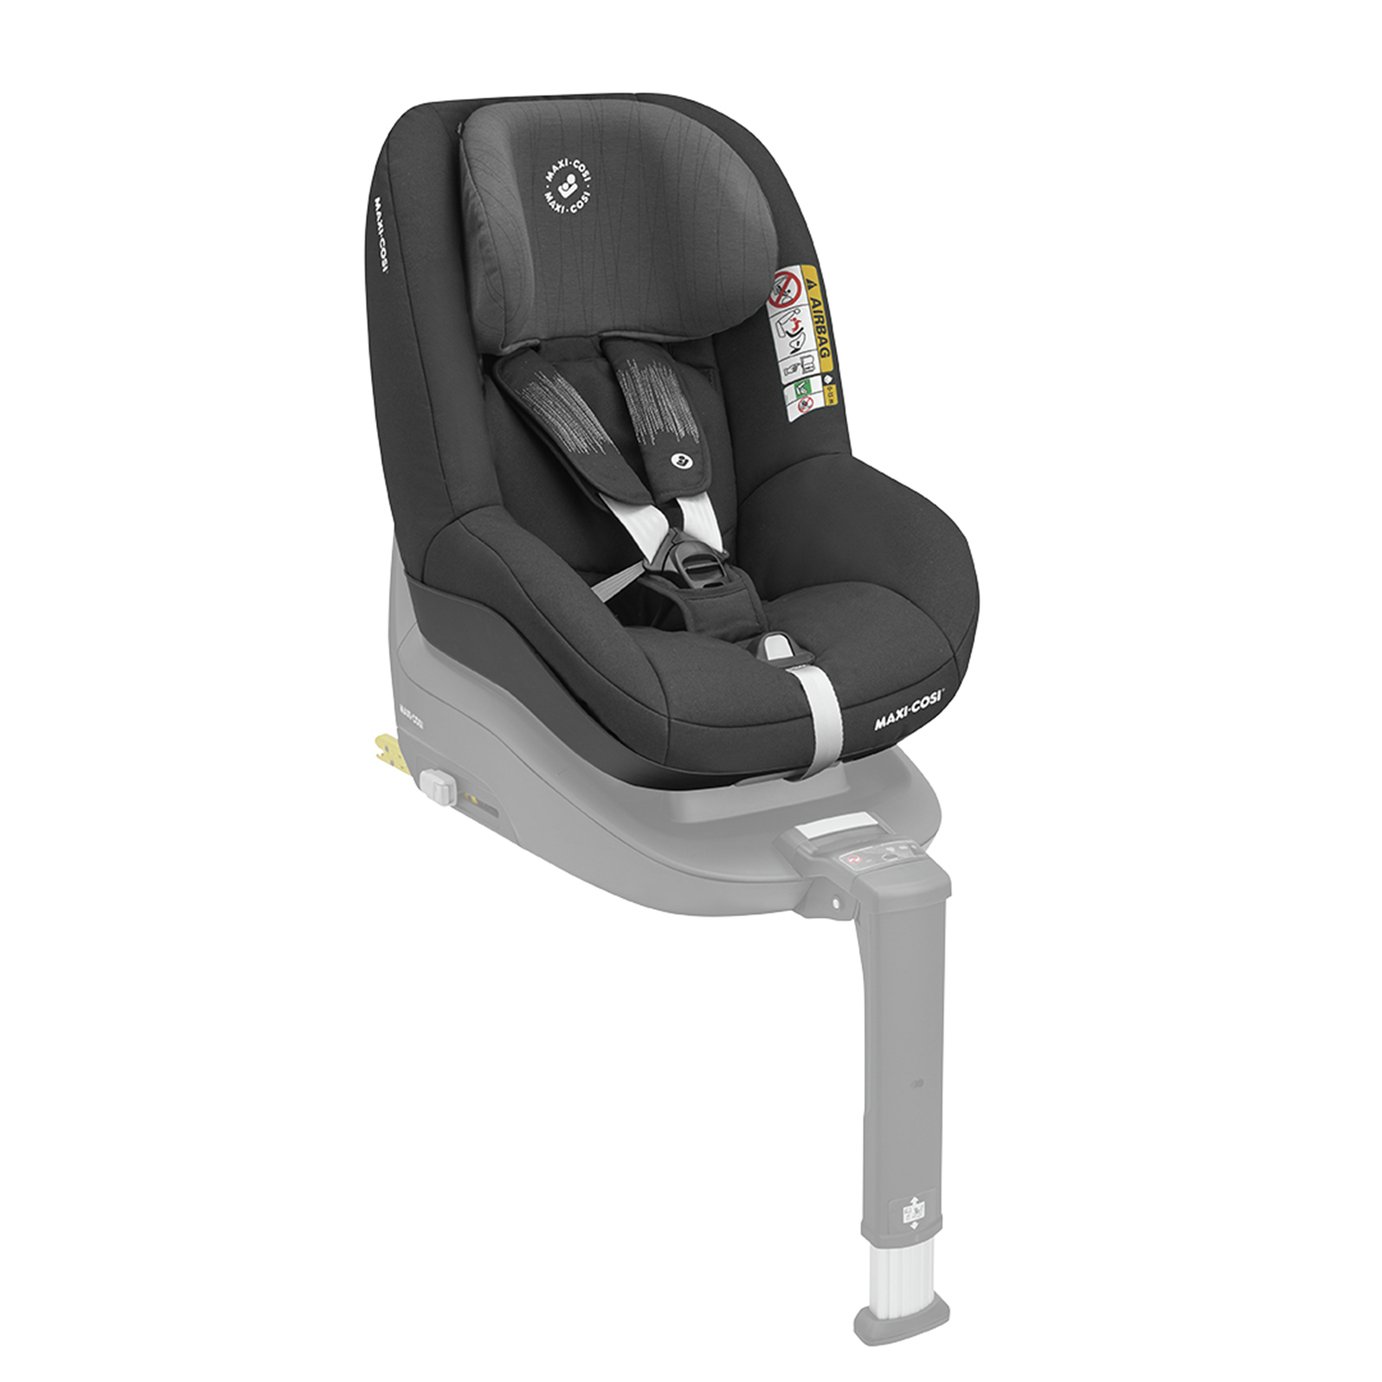 Maxi-Cosi Pearl Smart Group 1 i-Size Car Seat Review